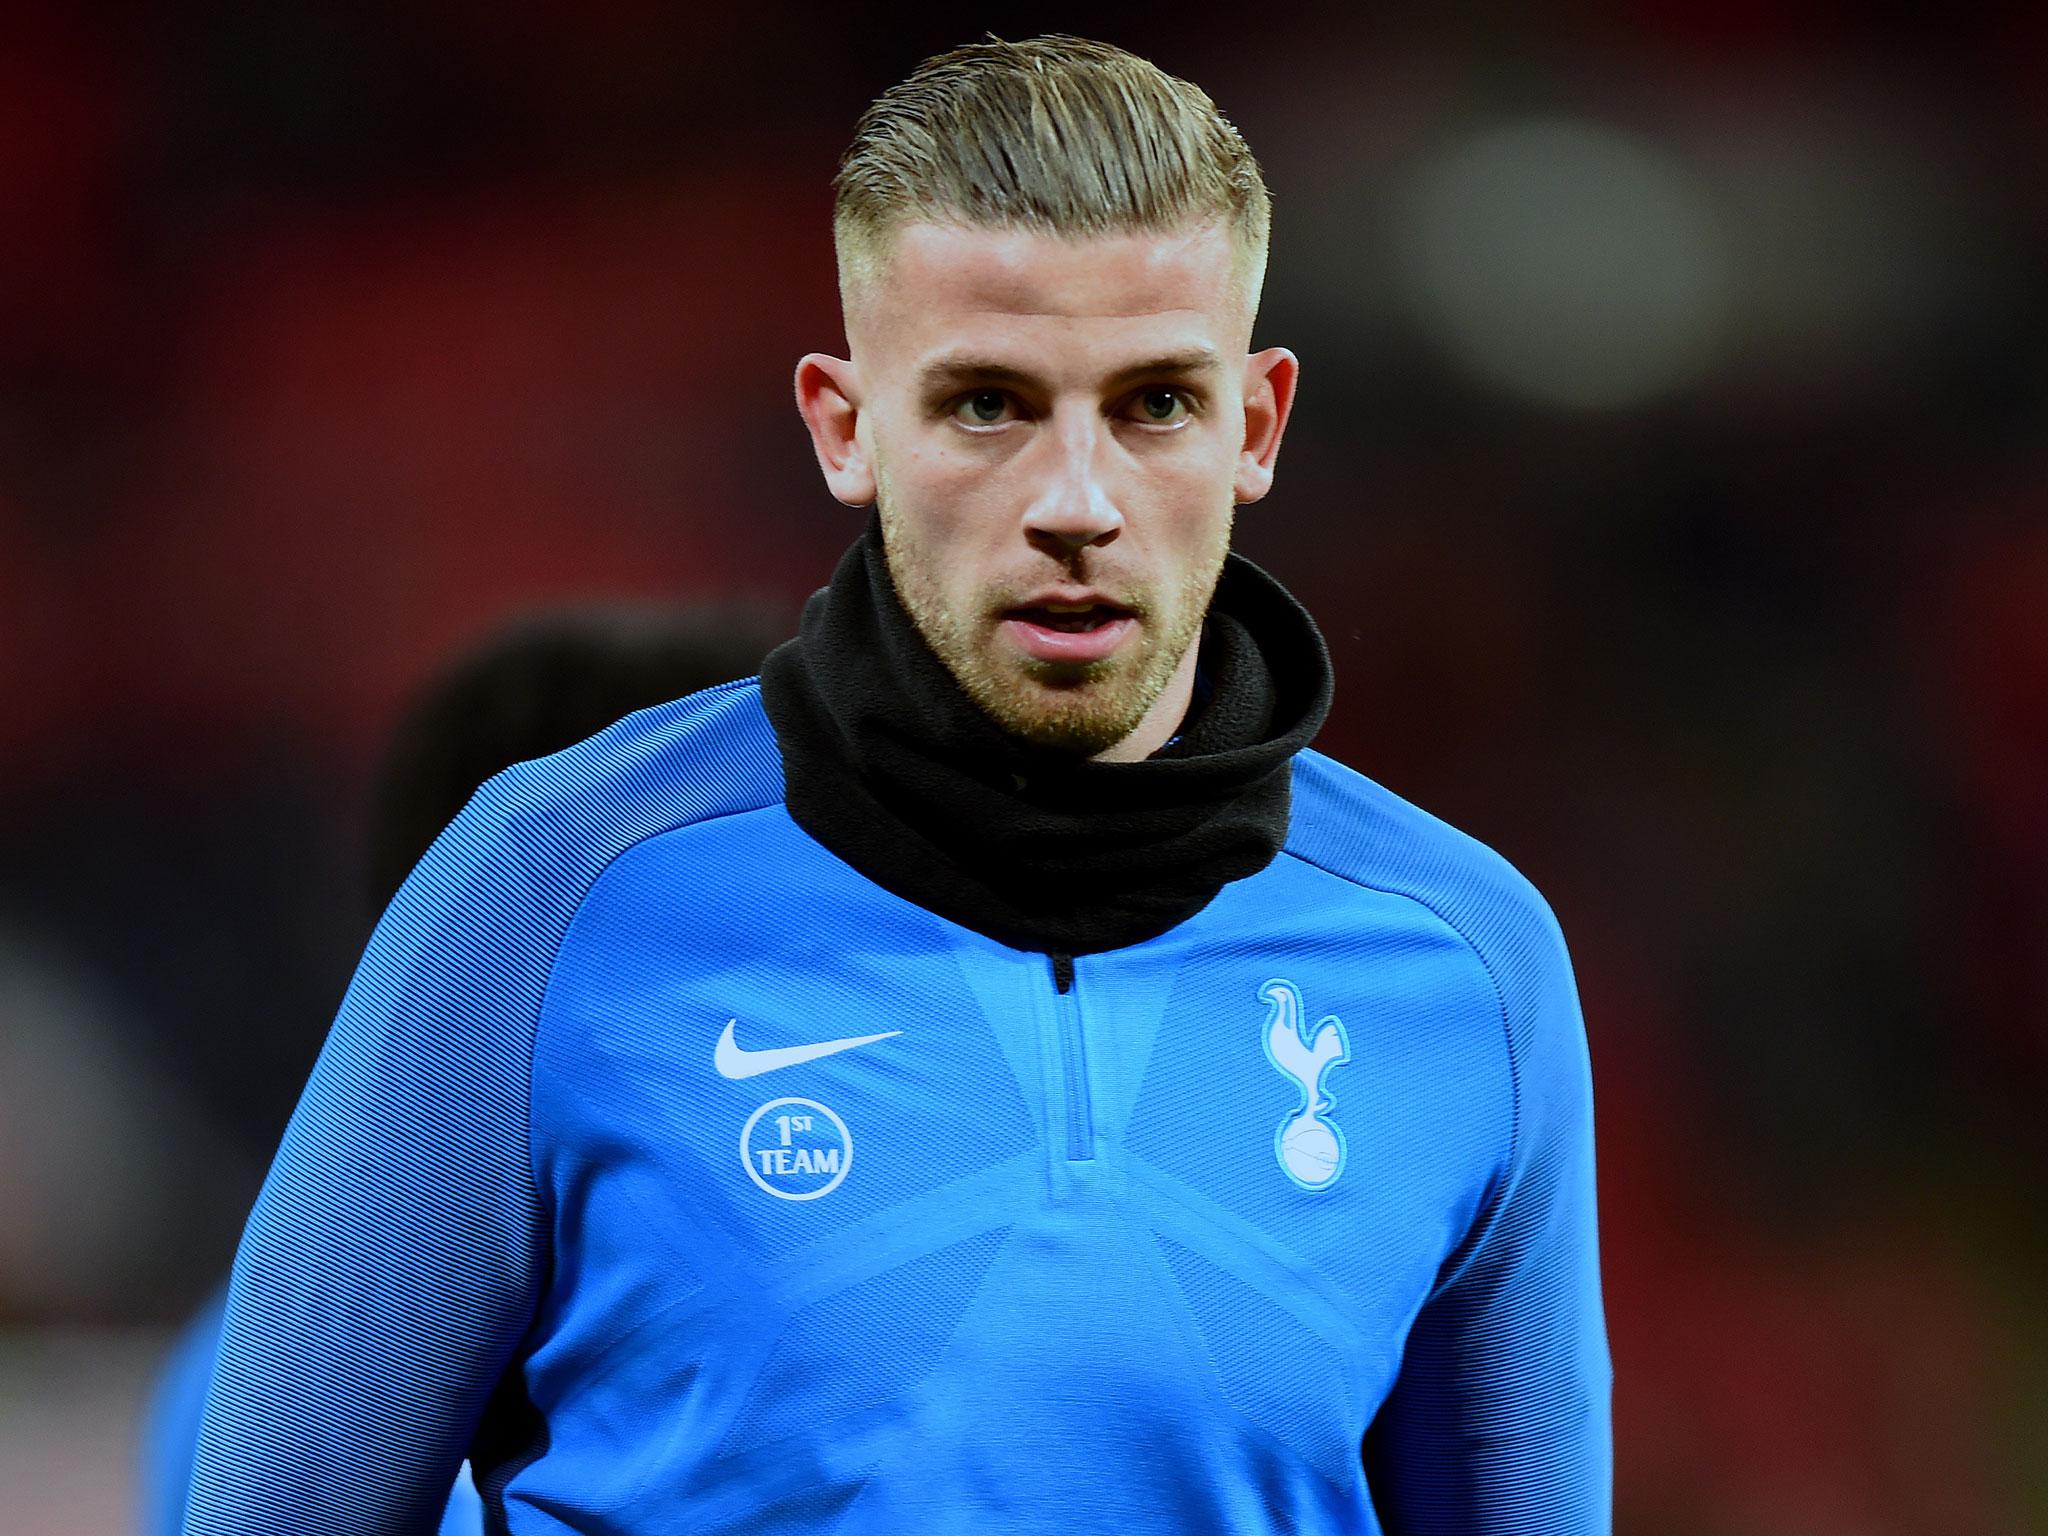 The Belgian was also absent from Tottenham's matchday squad against Arsenal